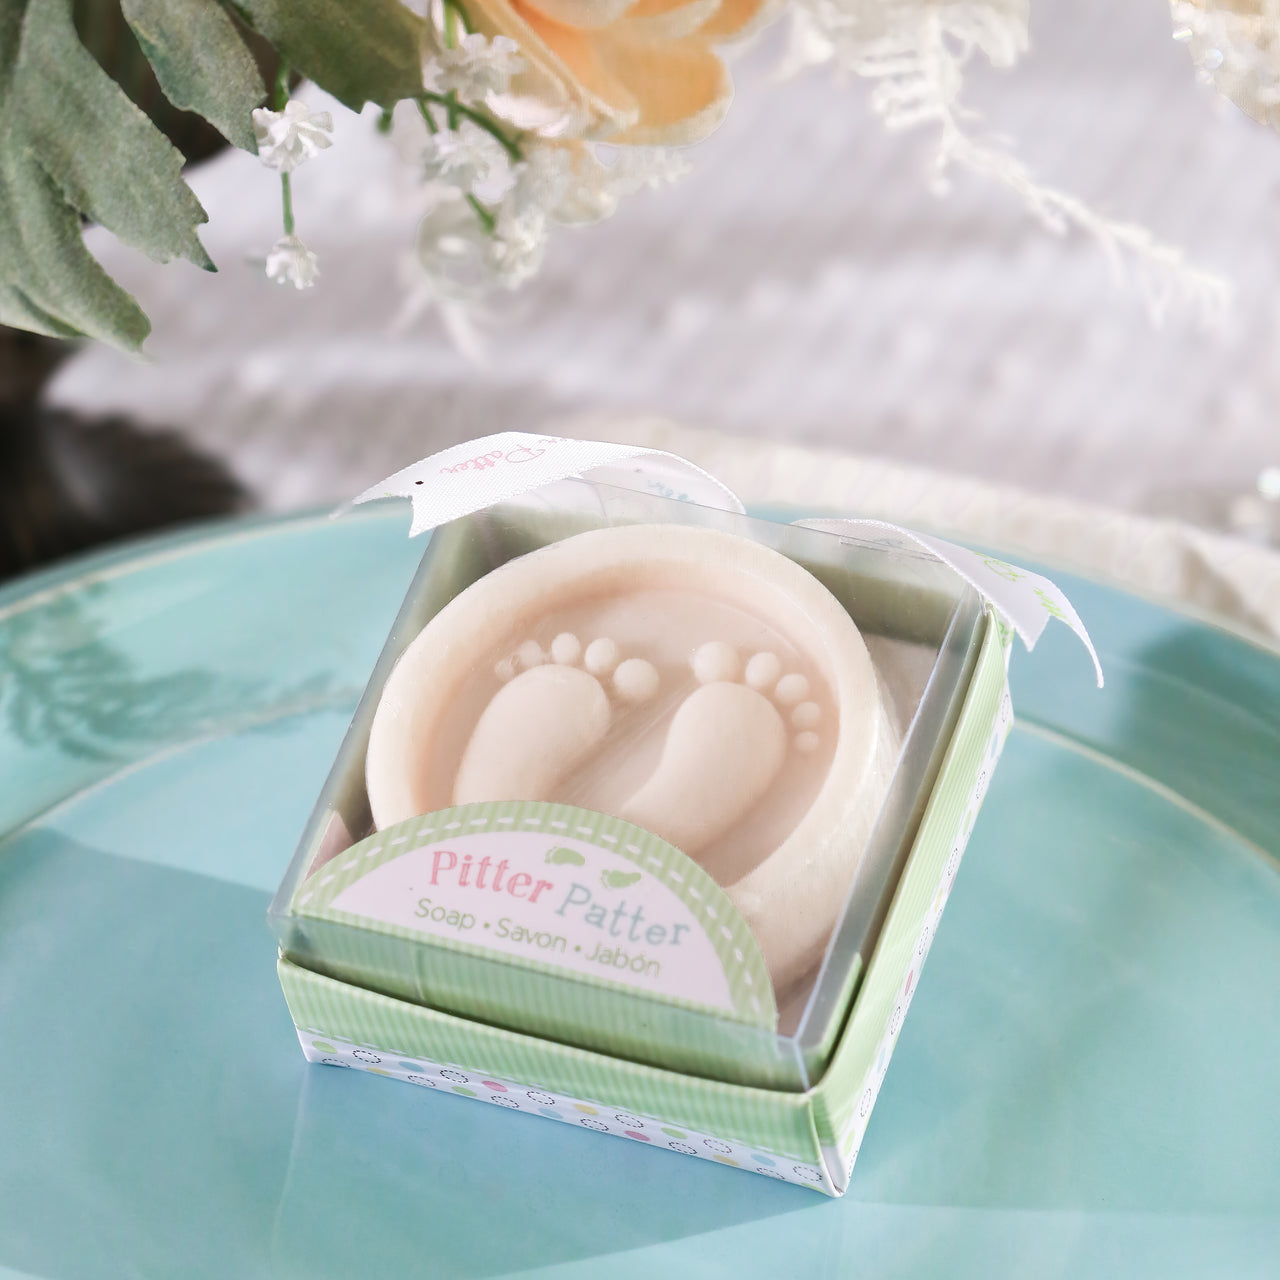 Pitter Patter Baby Shower Soap